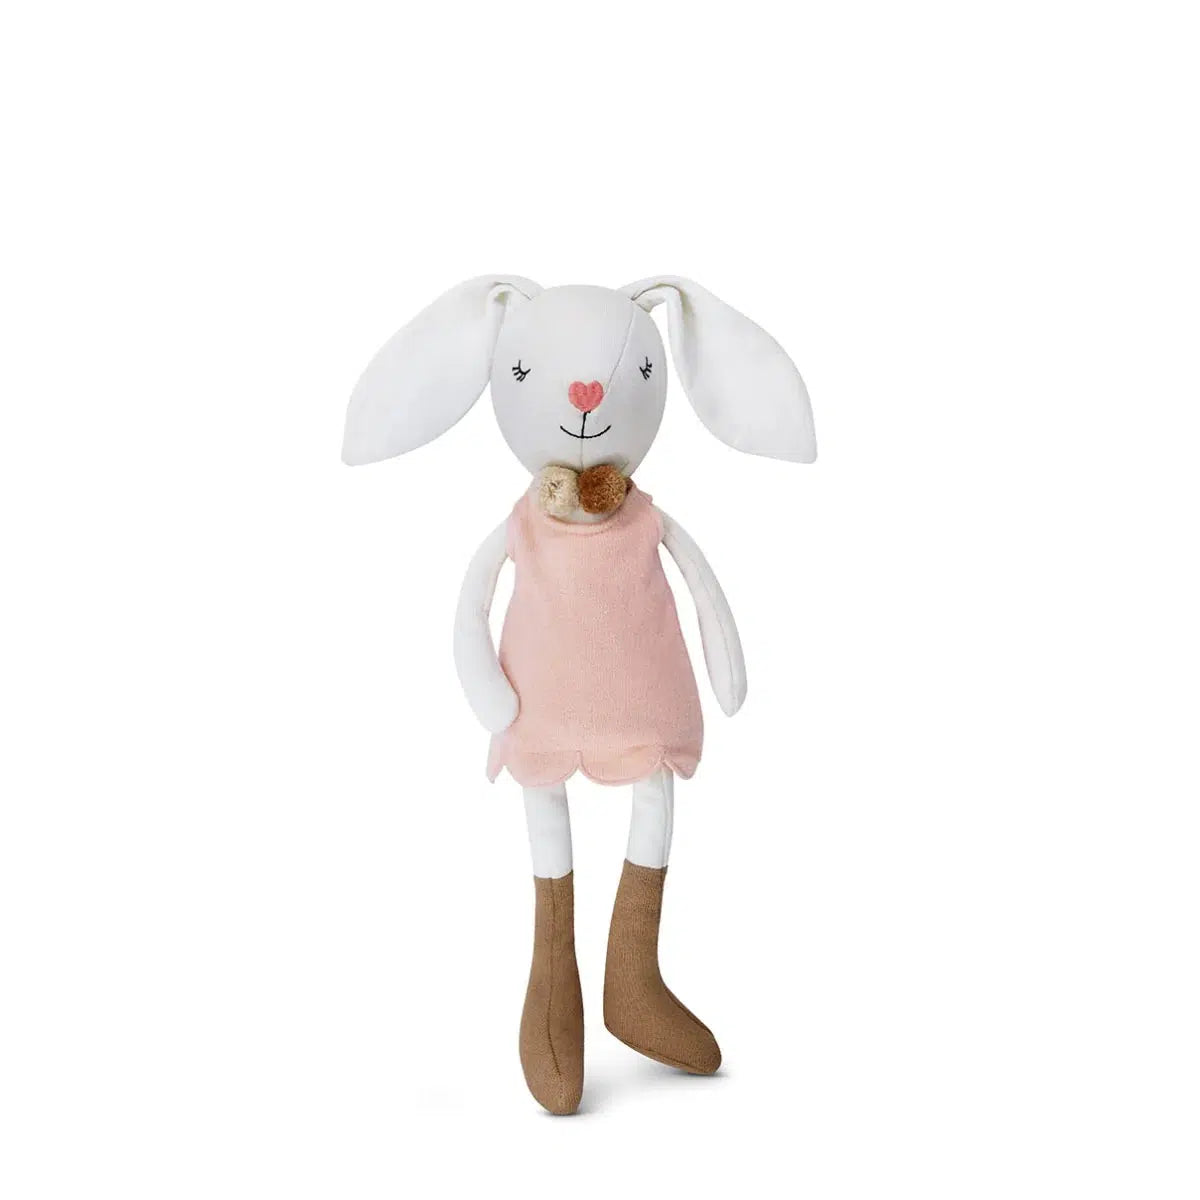 Front view of Knit Bunny Plush-Charlotte sitting.